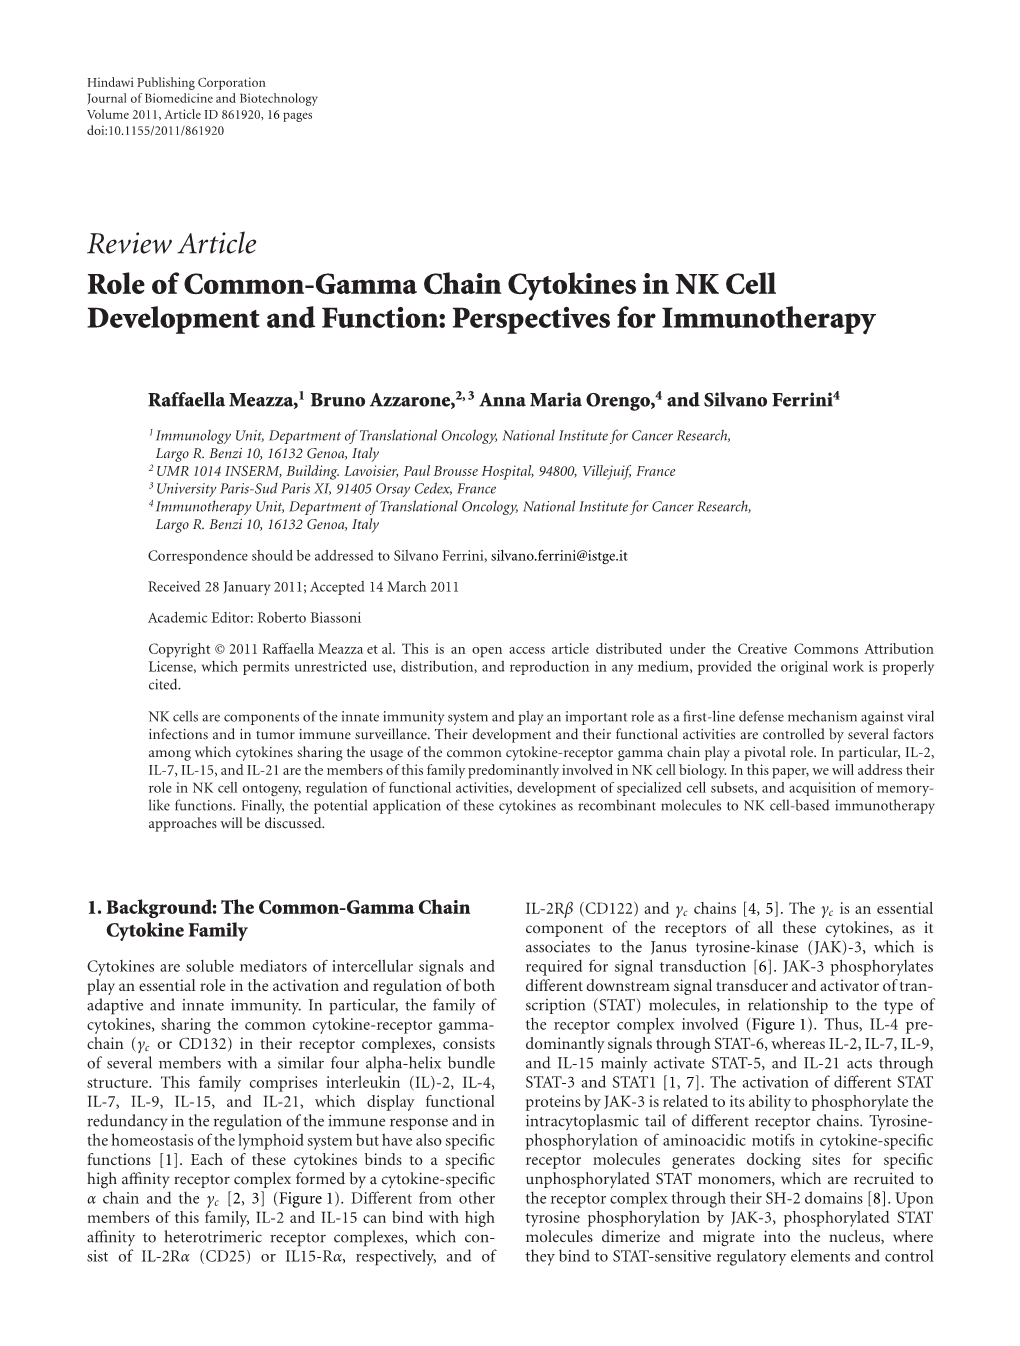 Role of Common-Gamma Chain Cytokines in NK Cell Development and Function: Perspectives for Immunotherapy